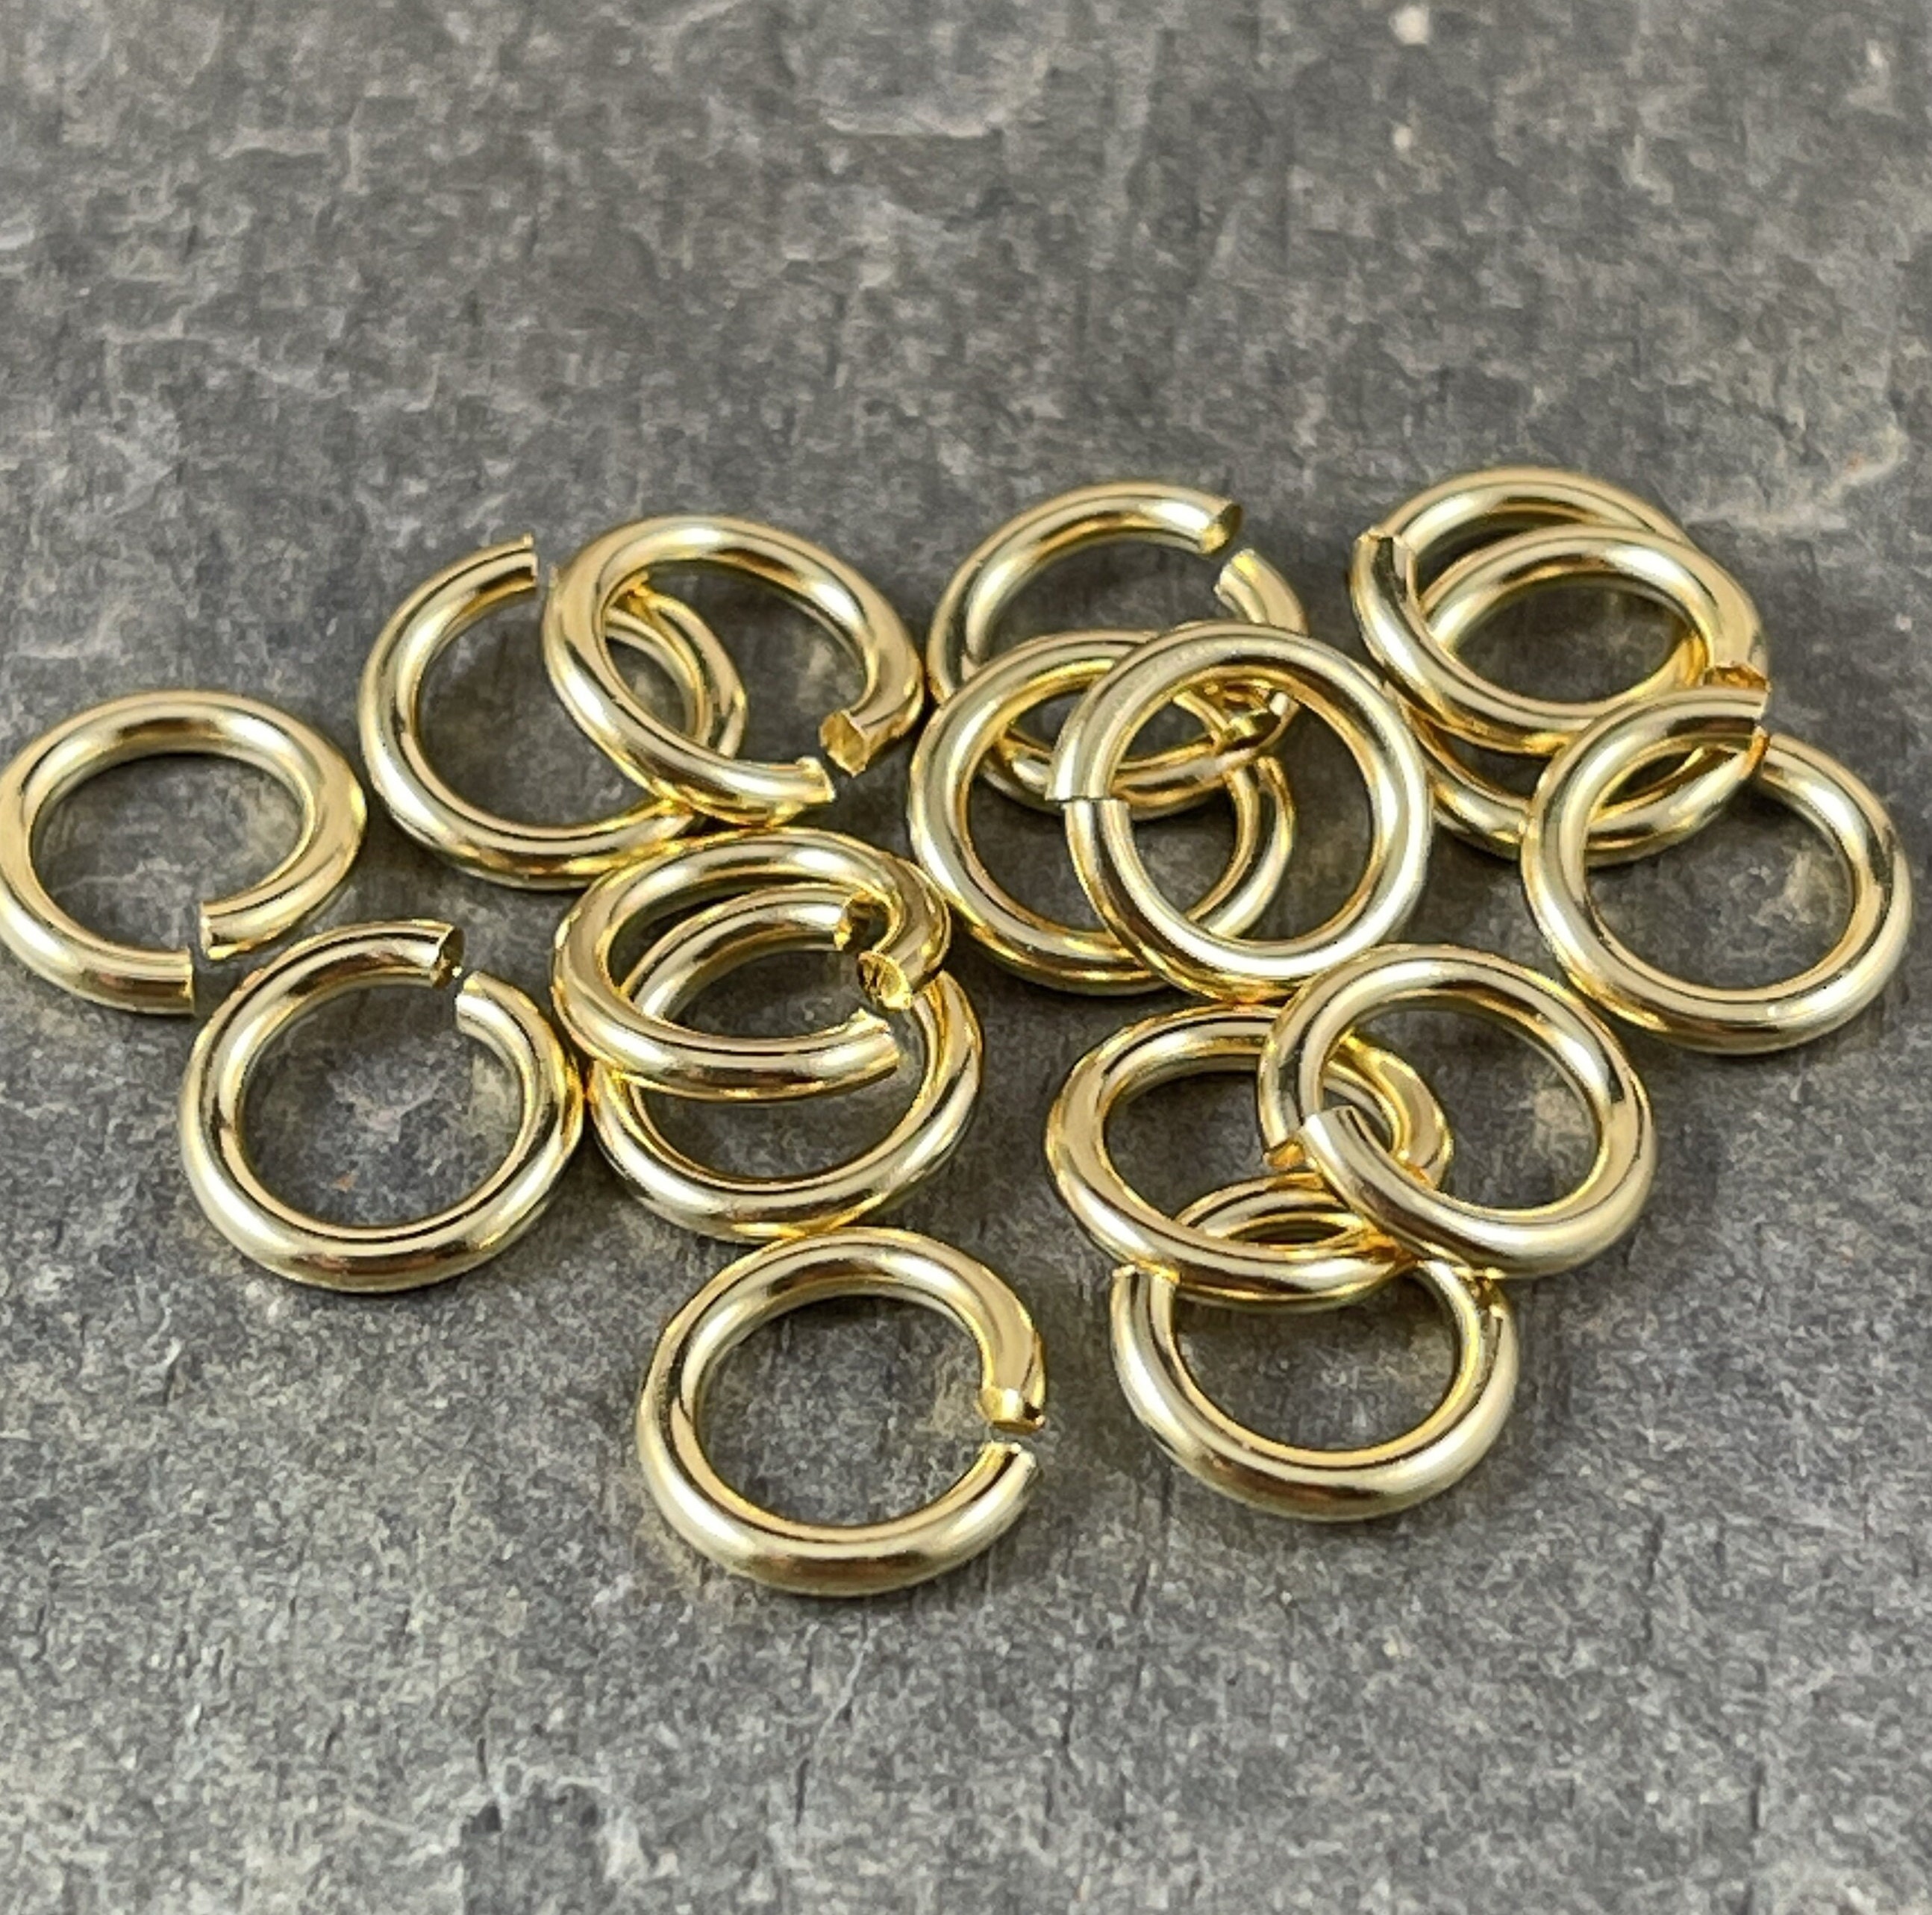  1800pcs Open Jump Rings, 4mm 5mm 6mm Assorted Size Jewelry Jump  Rings Connectors Open Jump Rings for Jewelry Making (Gold, Silver)